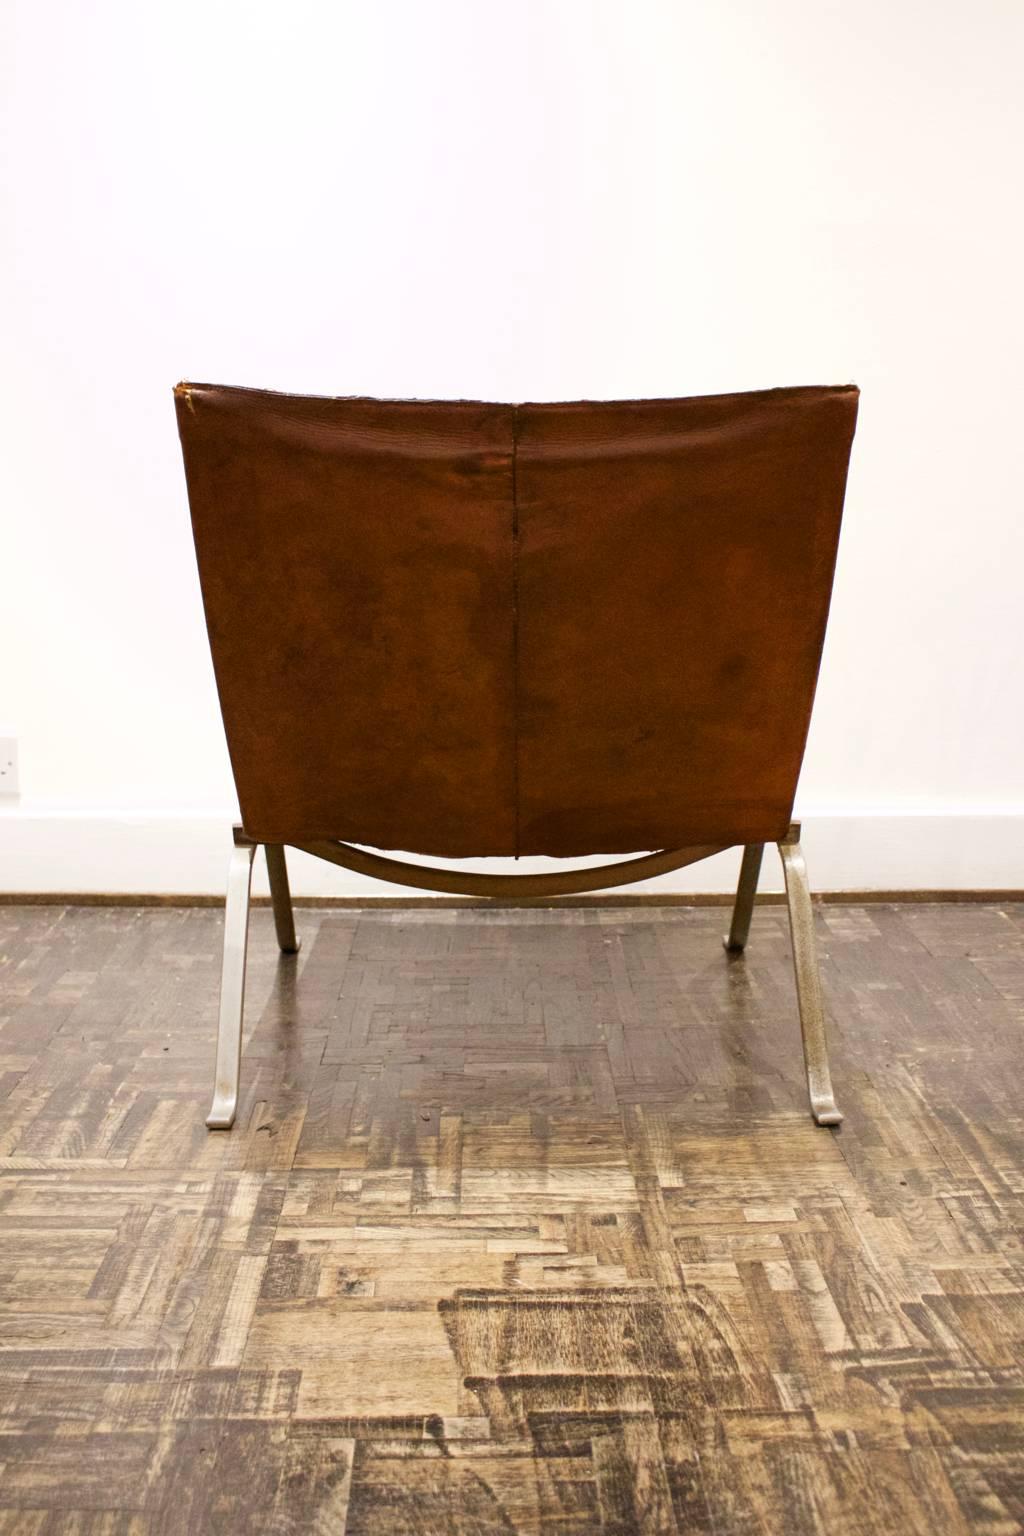 Danish Early PK22 by Poul Kjaerholm with Nickel Frame and Original Tan Leather